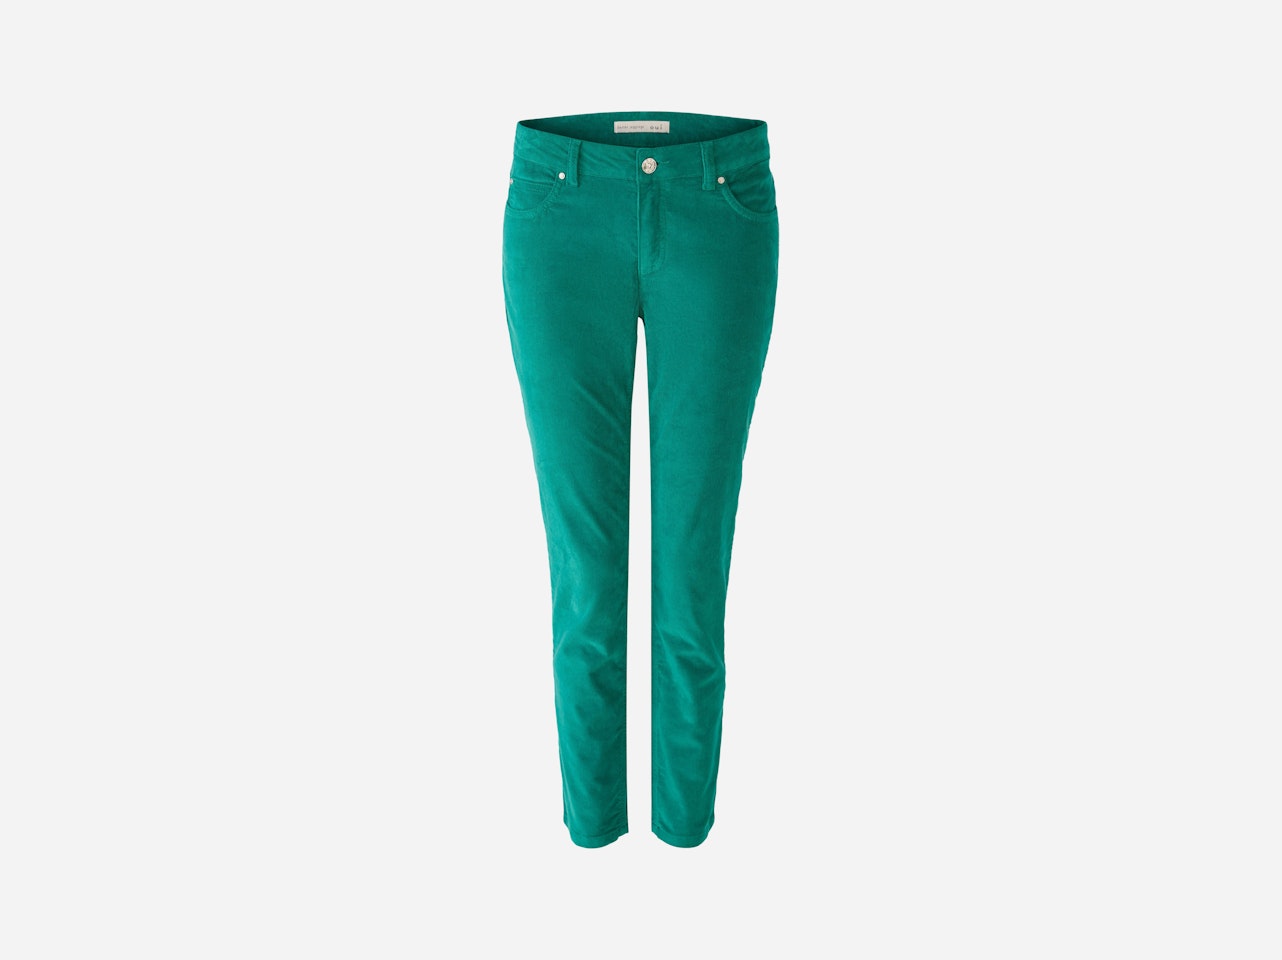 Bild 6 von BAXTOR Cord Jeggings Slim Fit, cropped in parasailing | Oui